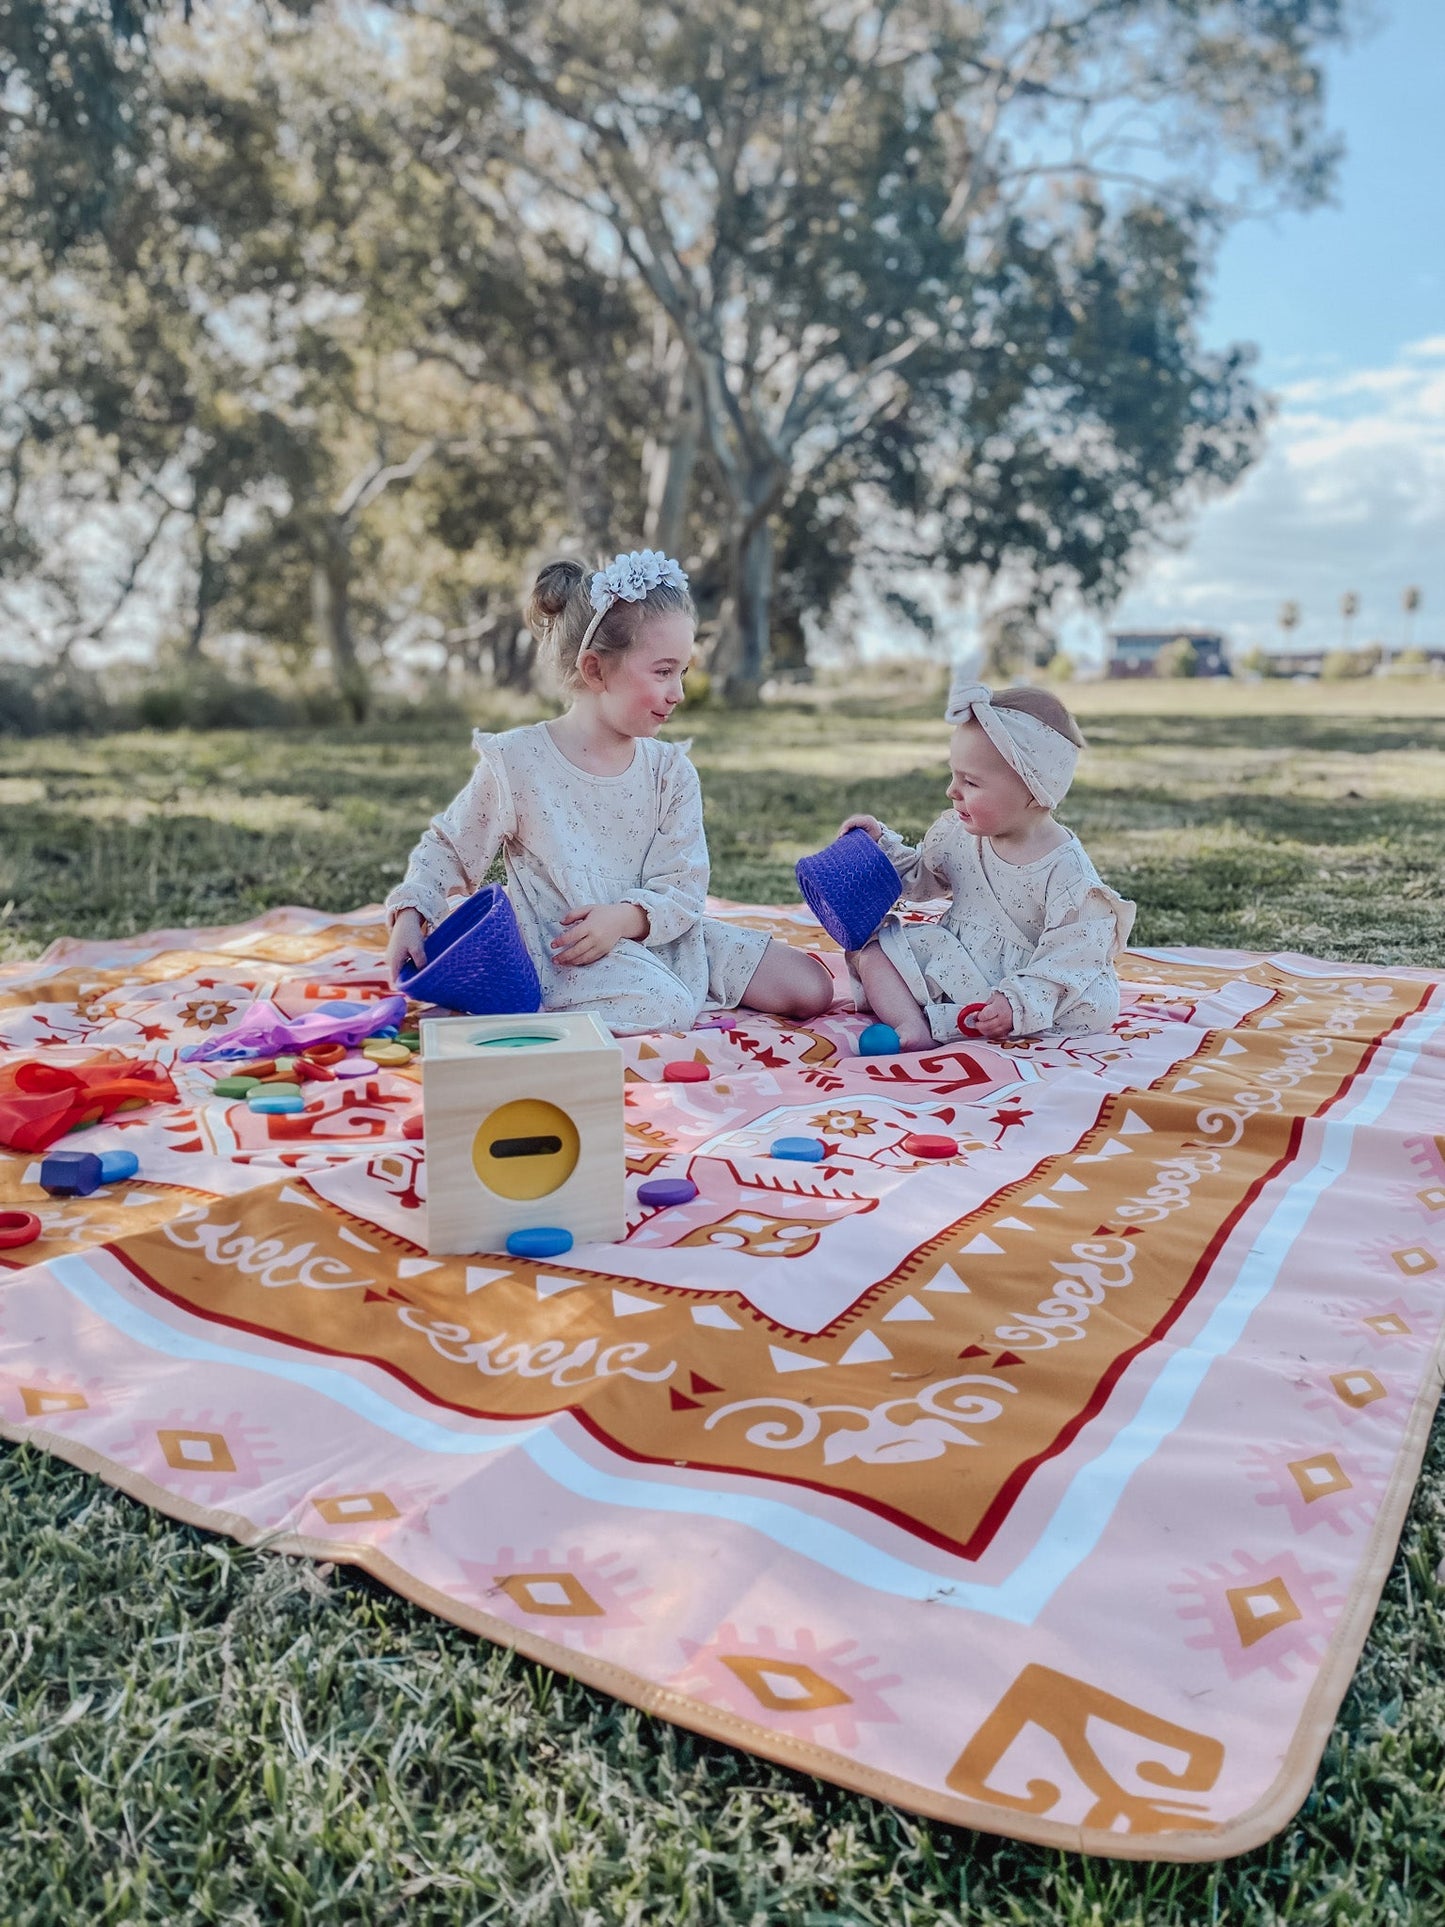 Extra Large Picnic Rug, Waterproof and Double Sided, Saffron